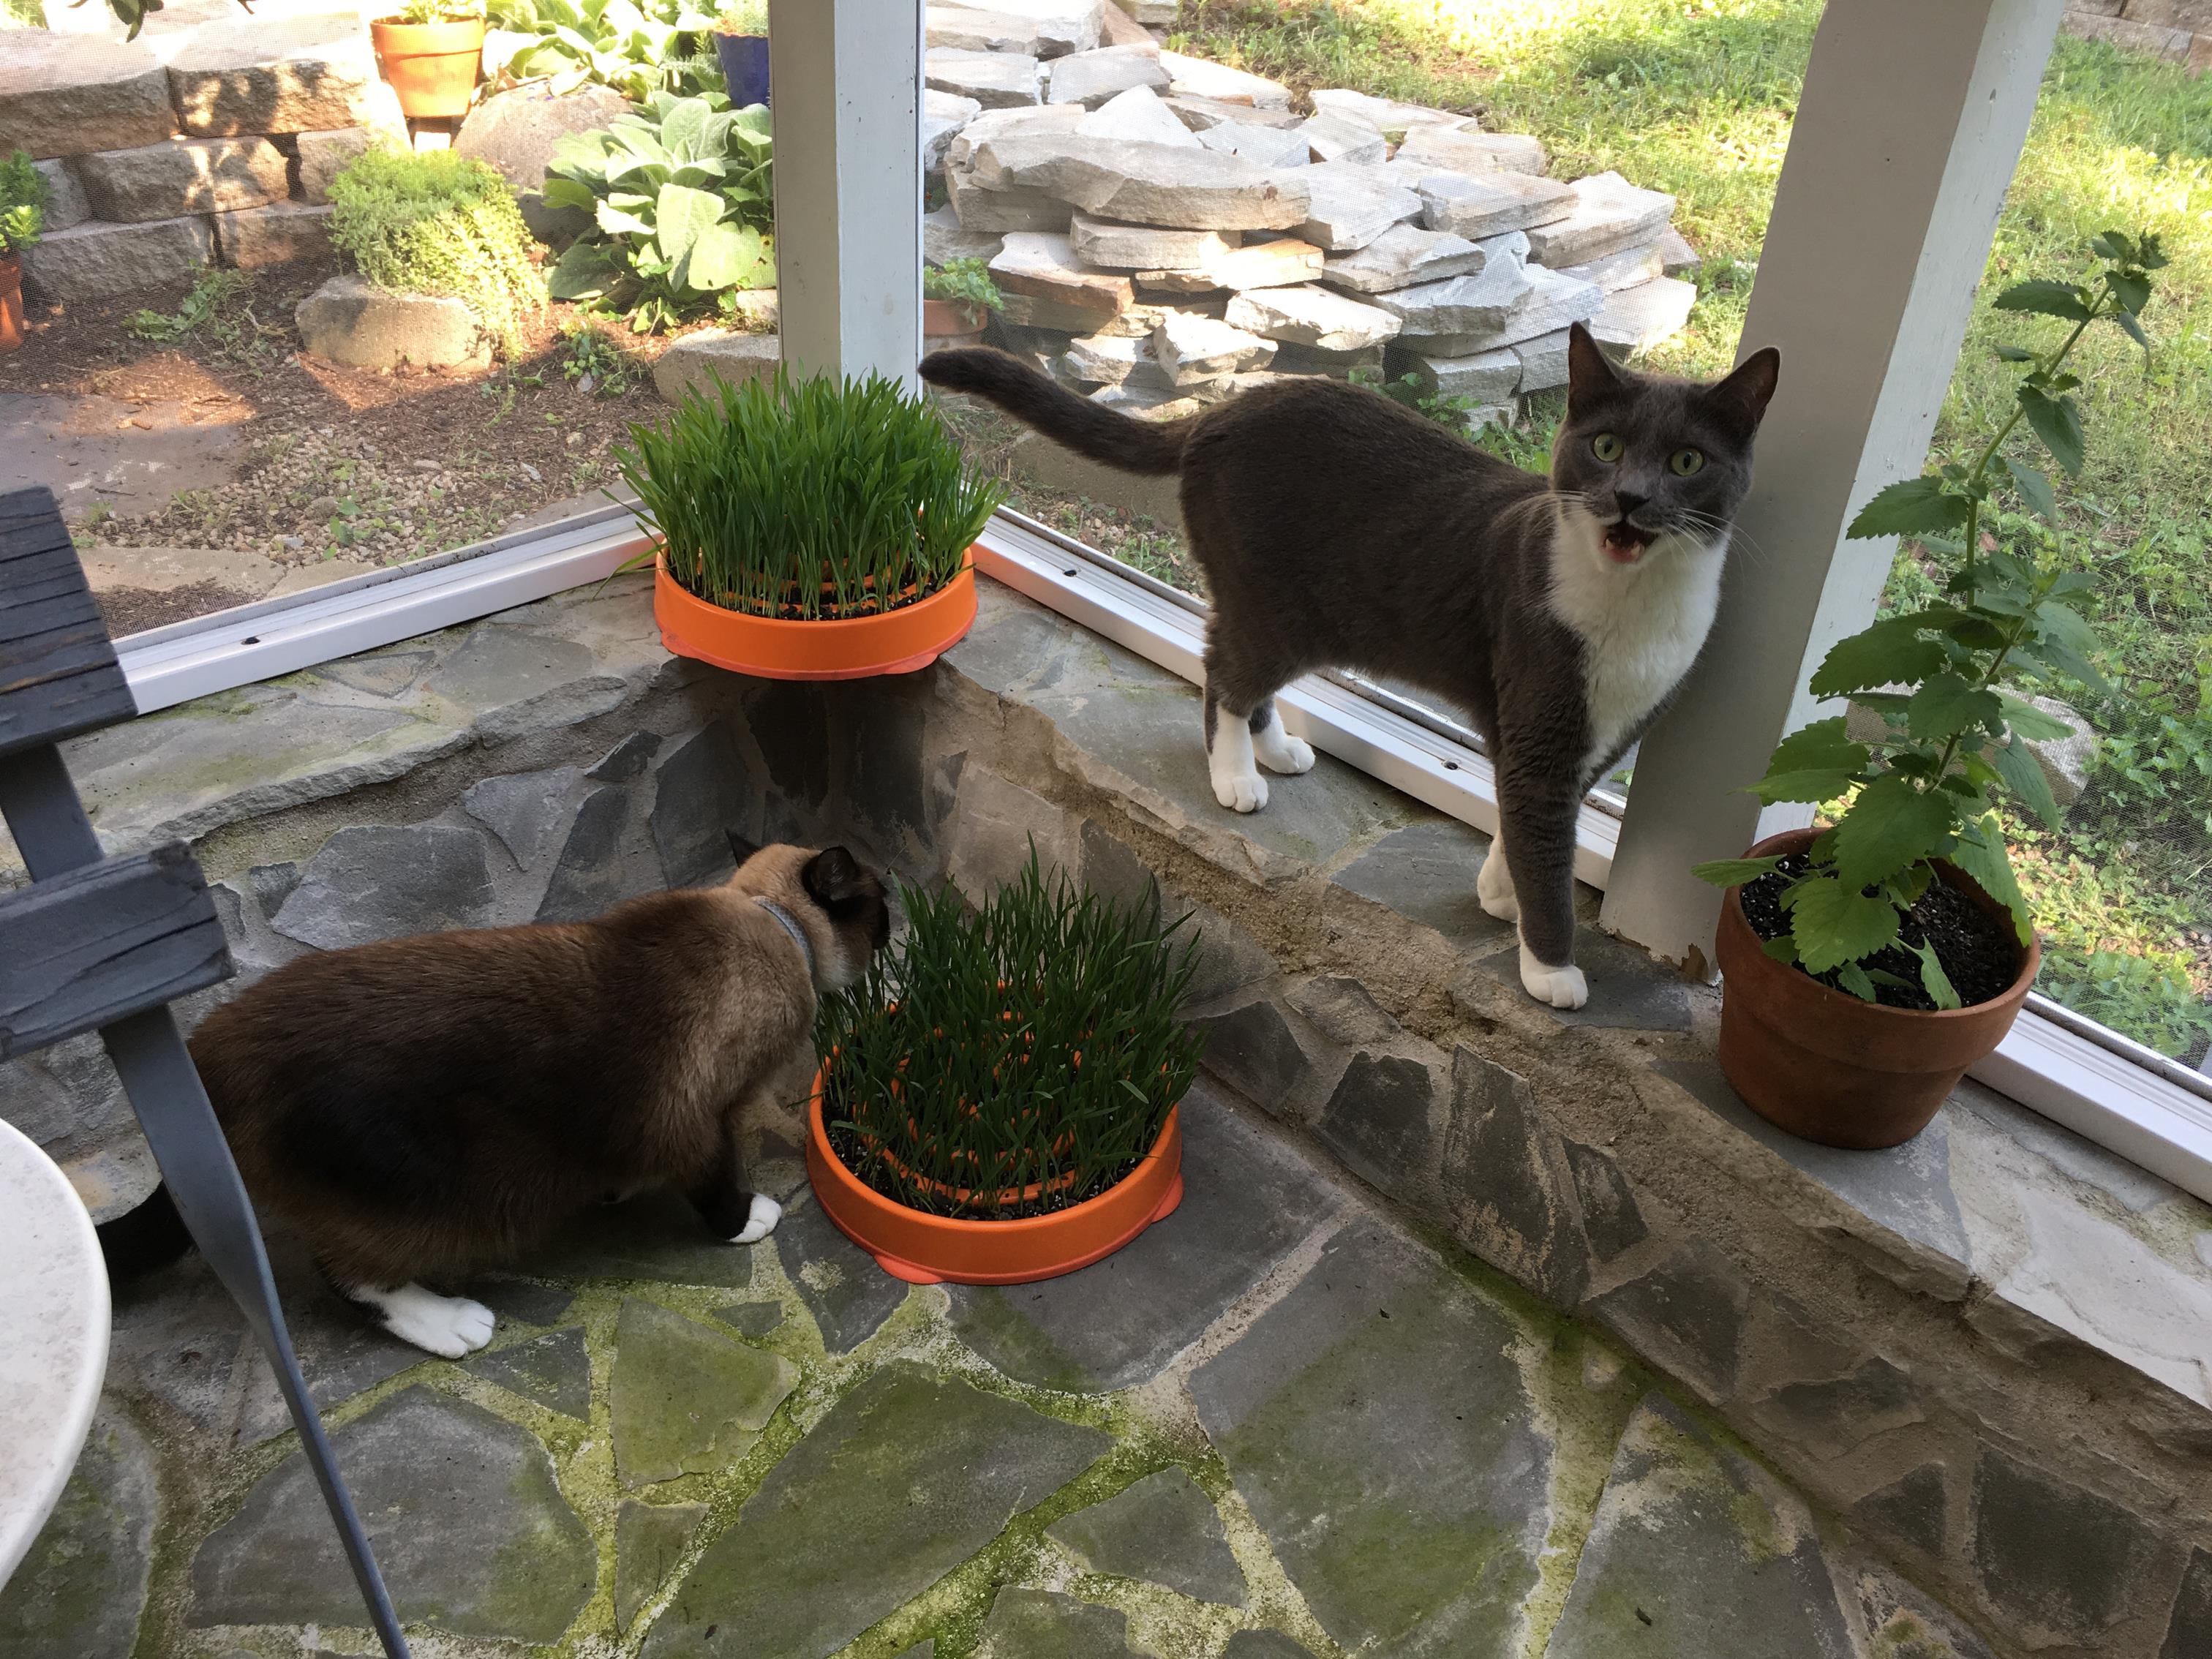 Here Willow and Soren are enjoying their cat grass planters.